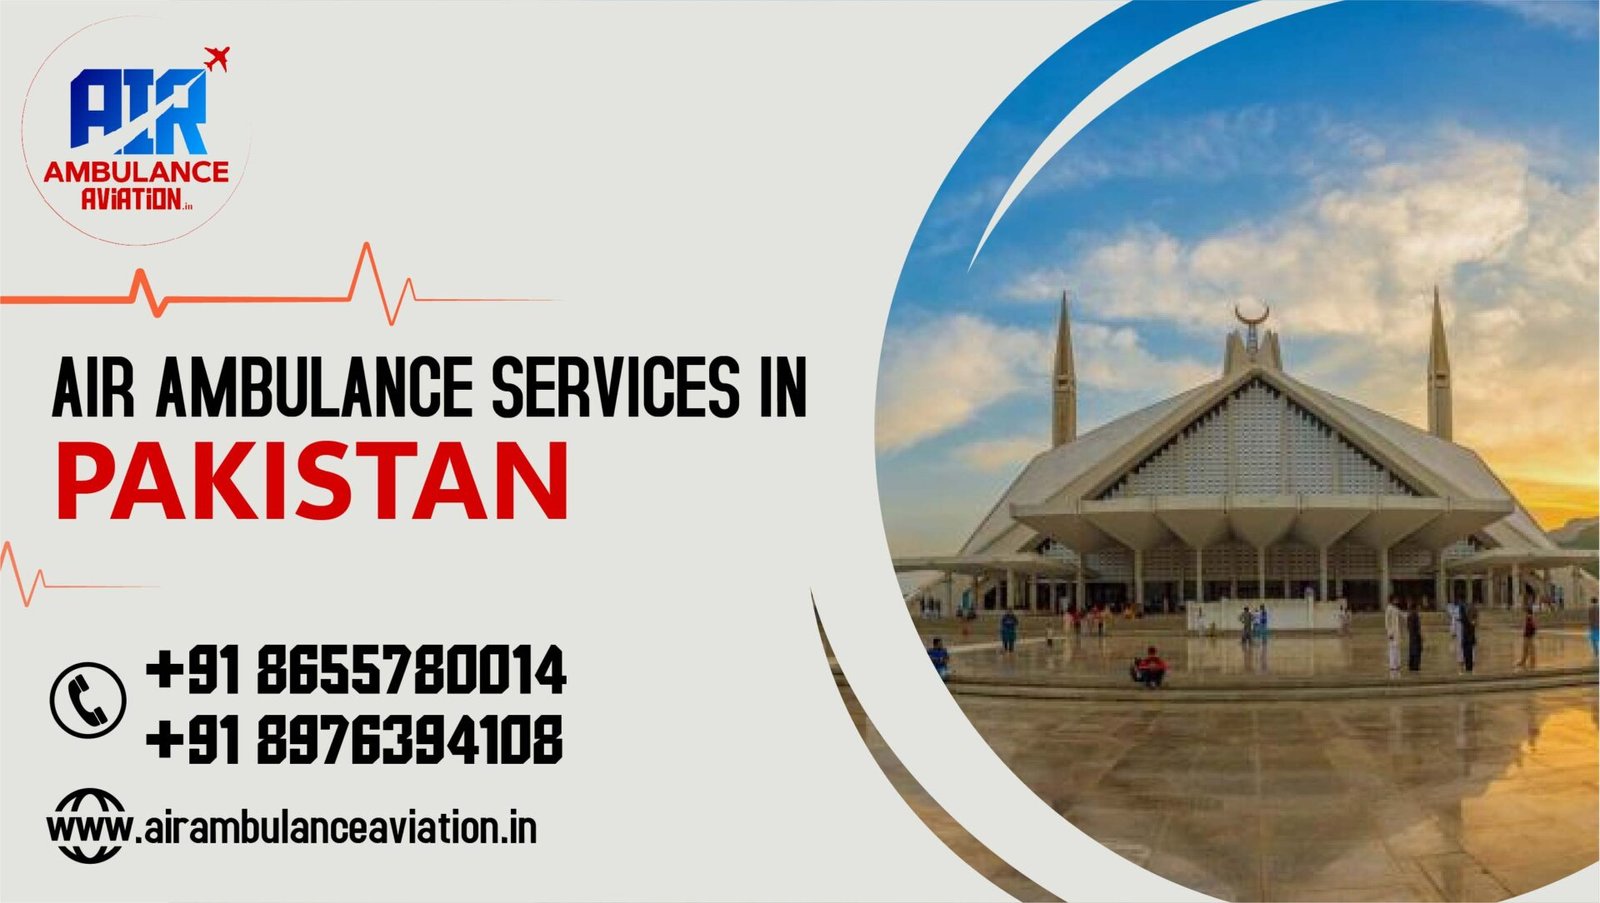 Air Ambulance Services in Pakistan